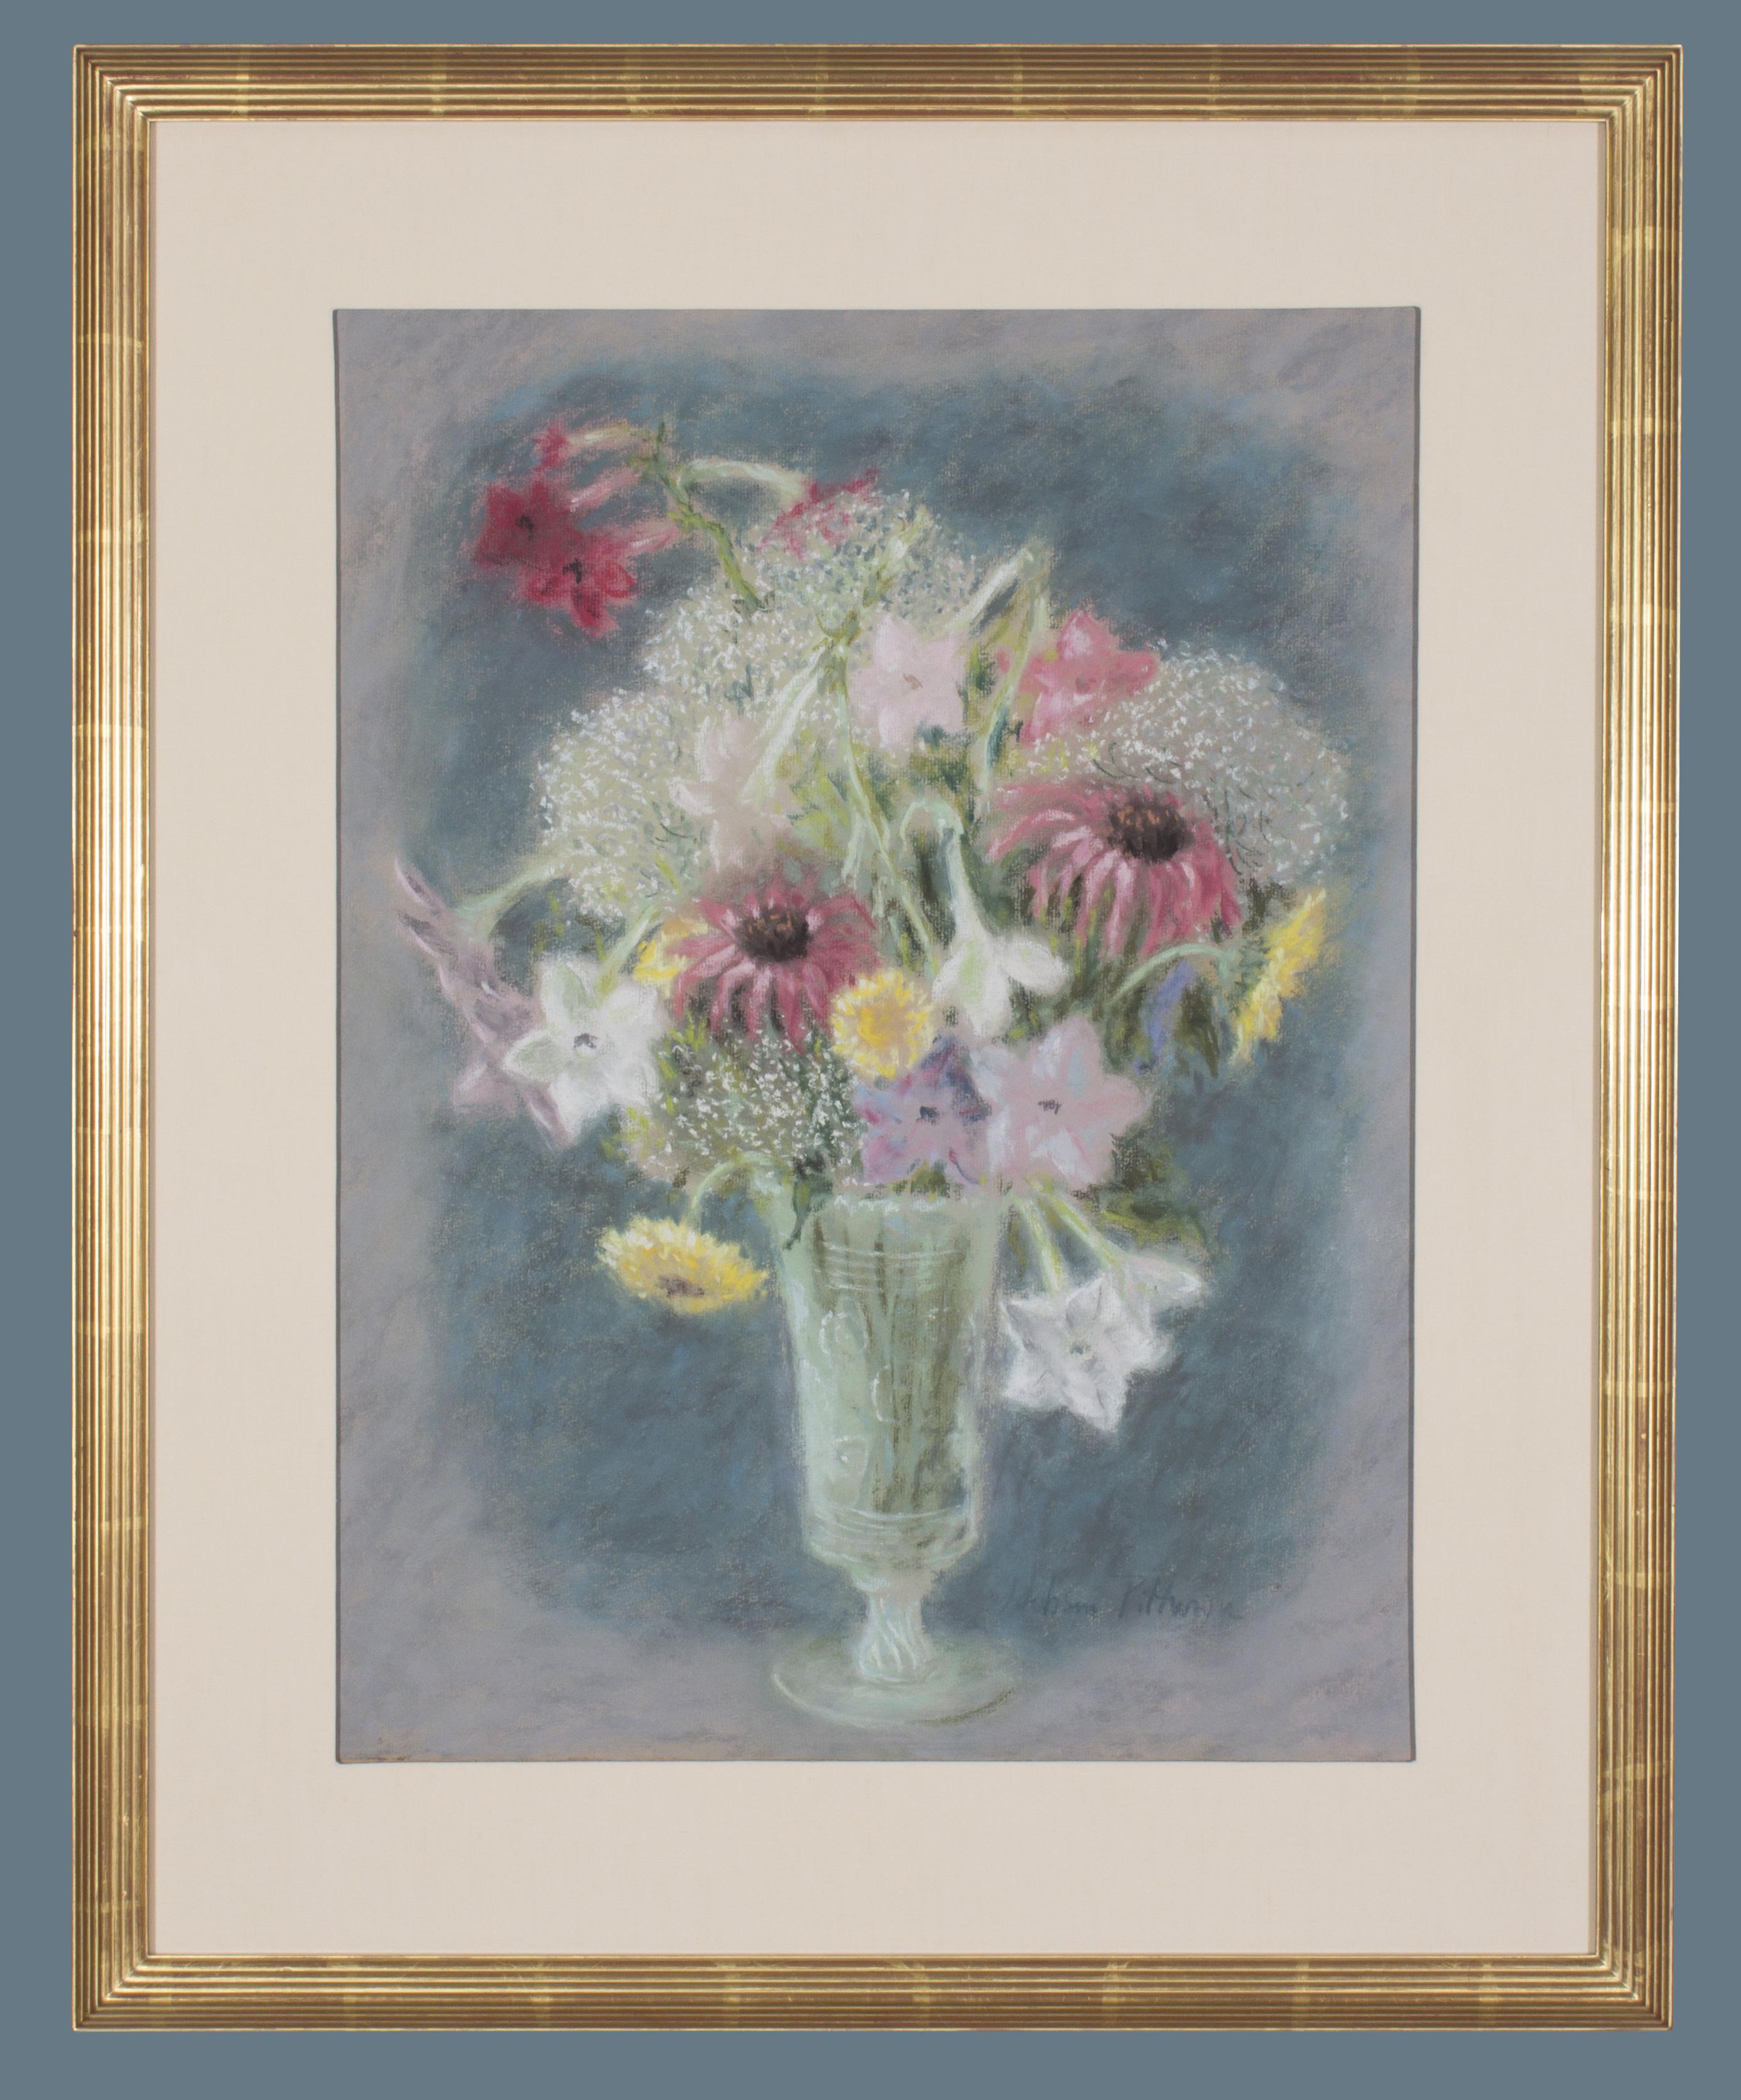 Bouquet in a Glass Vase - a pastel by Hobson Pittman